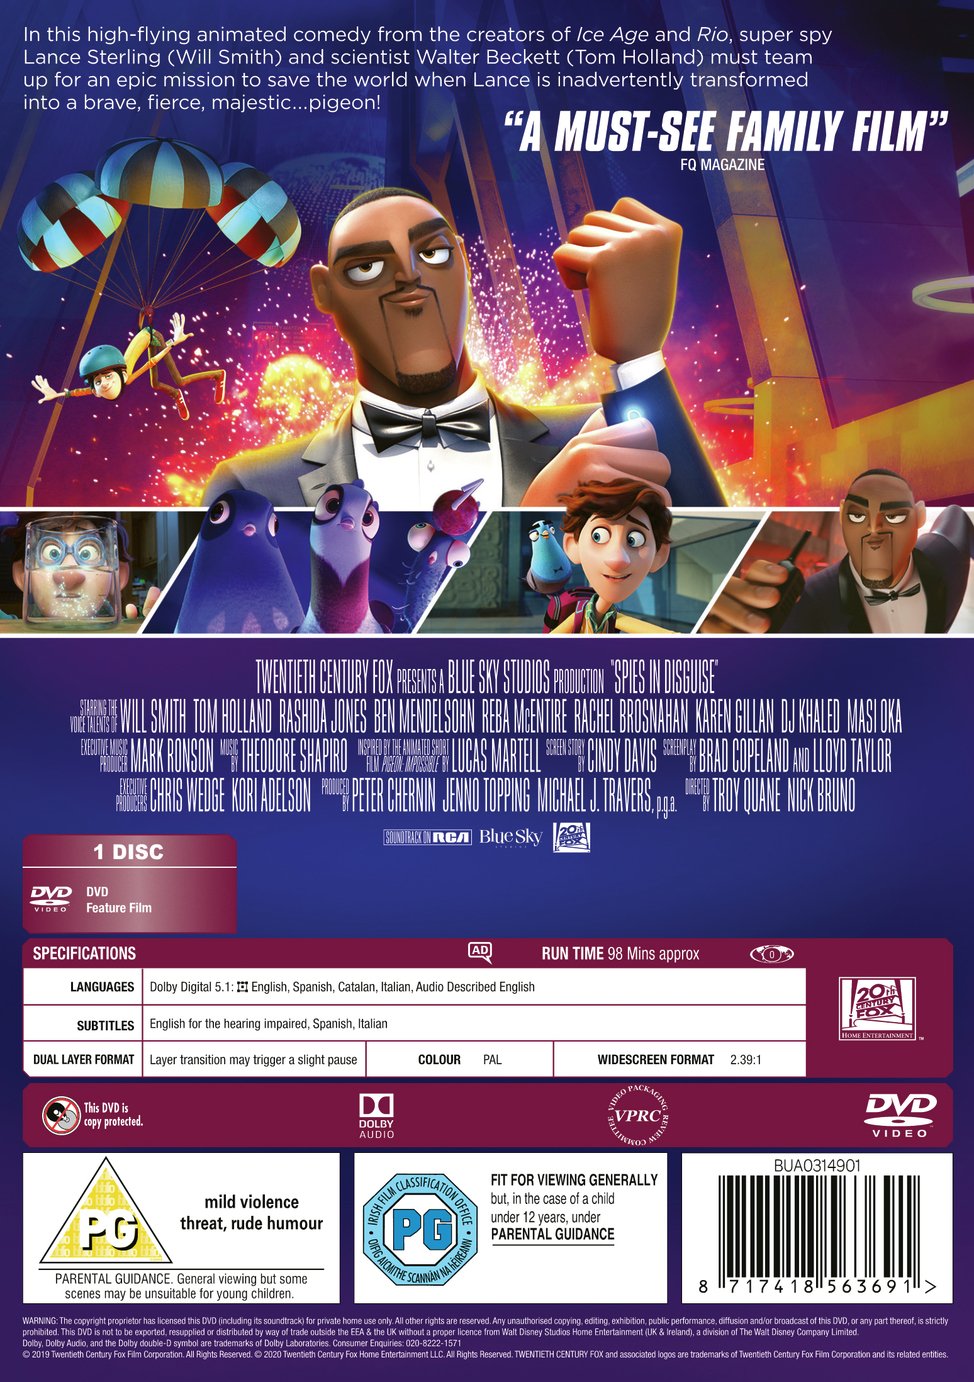 Spies in Disguise DVD Review